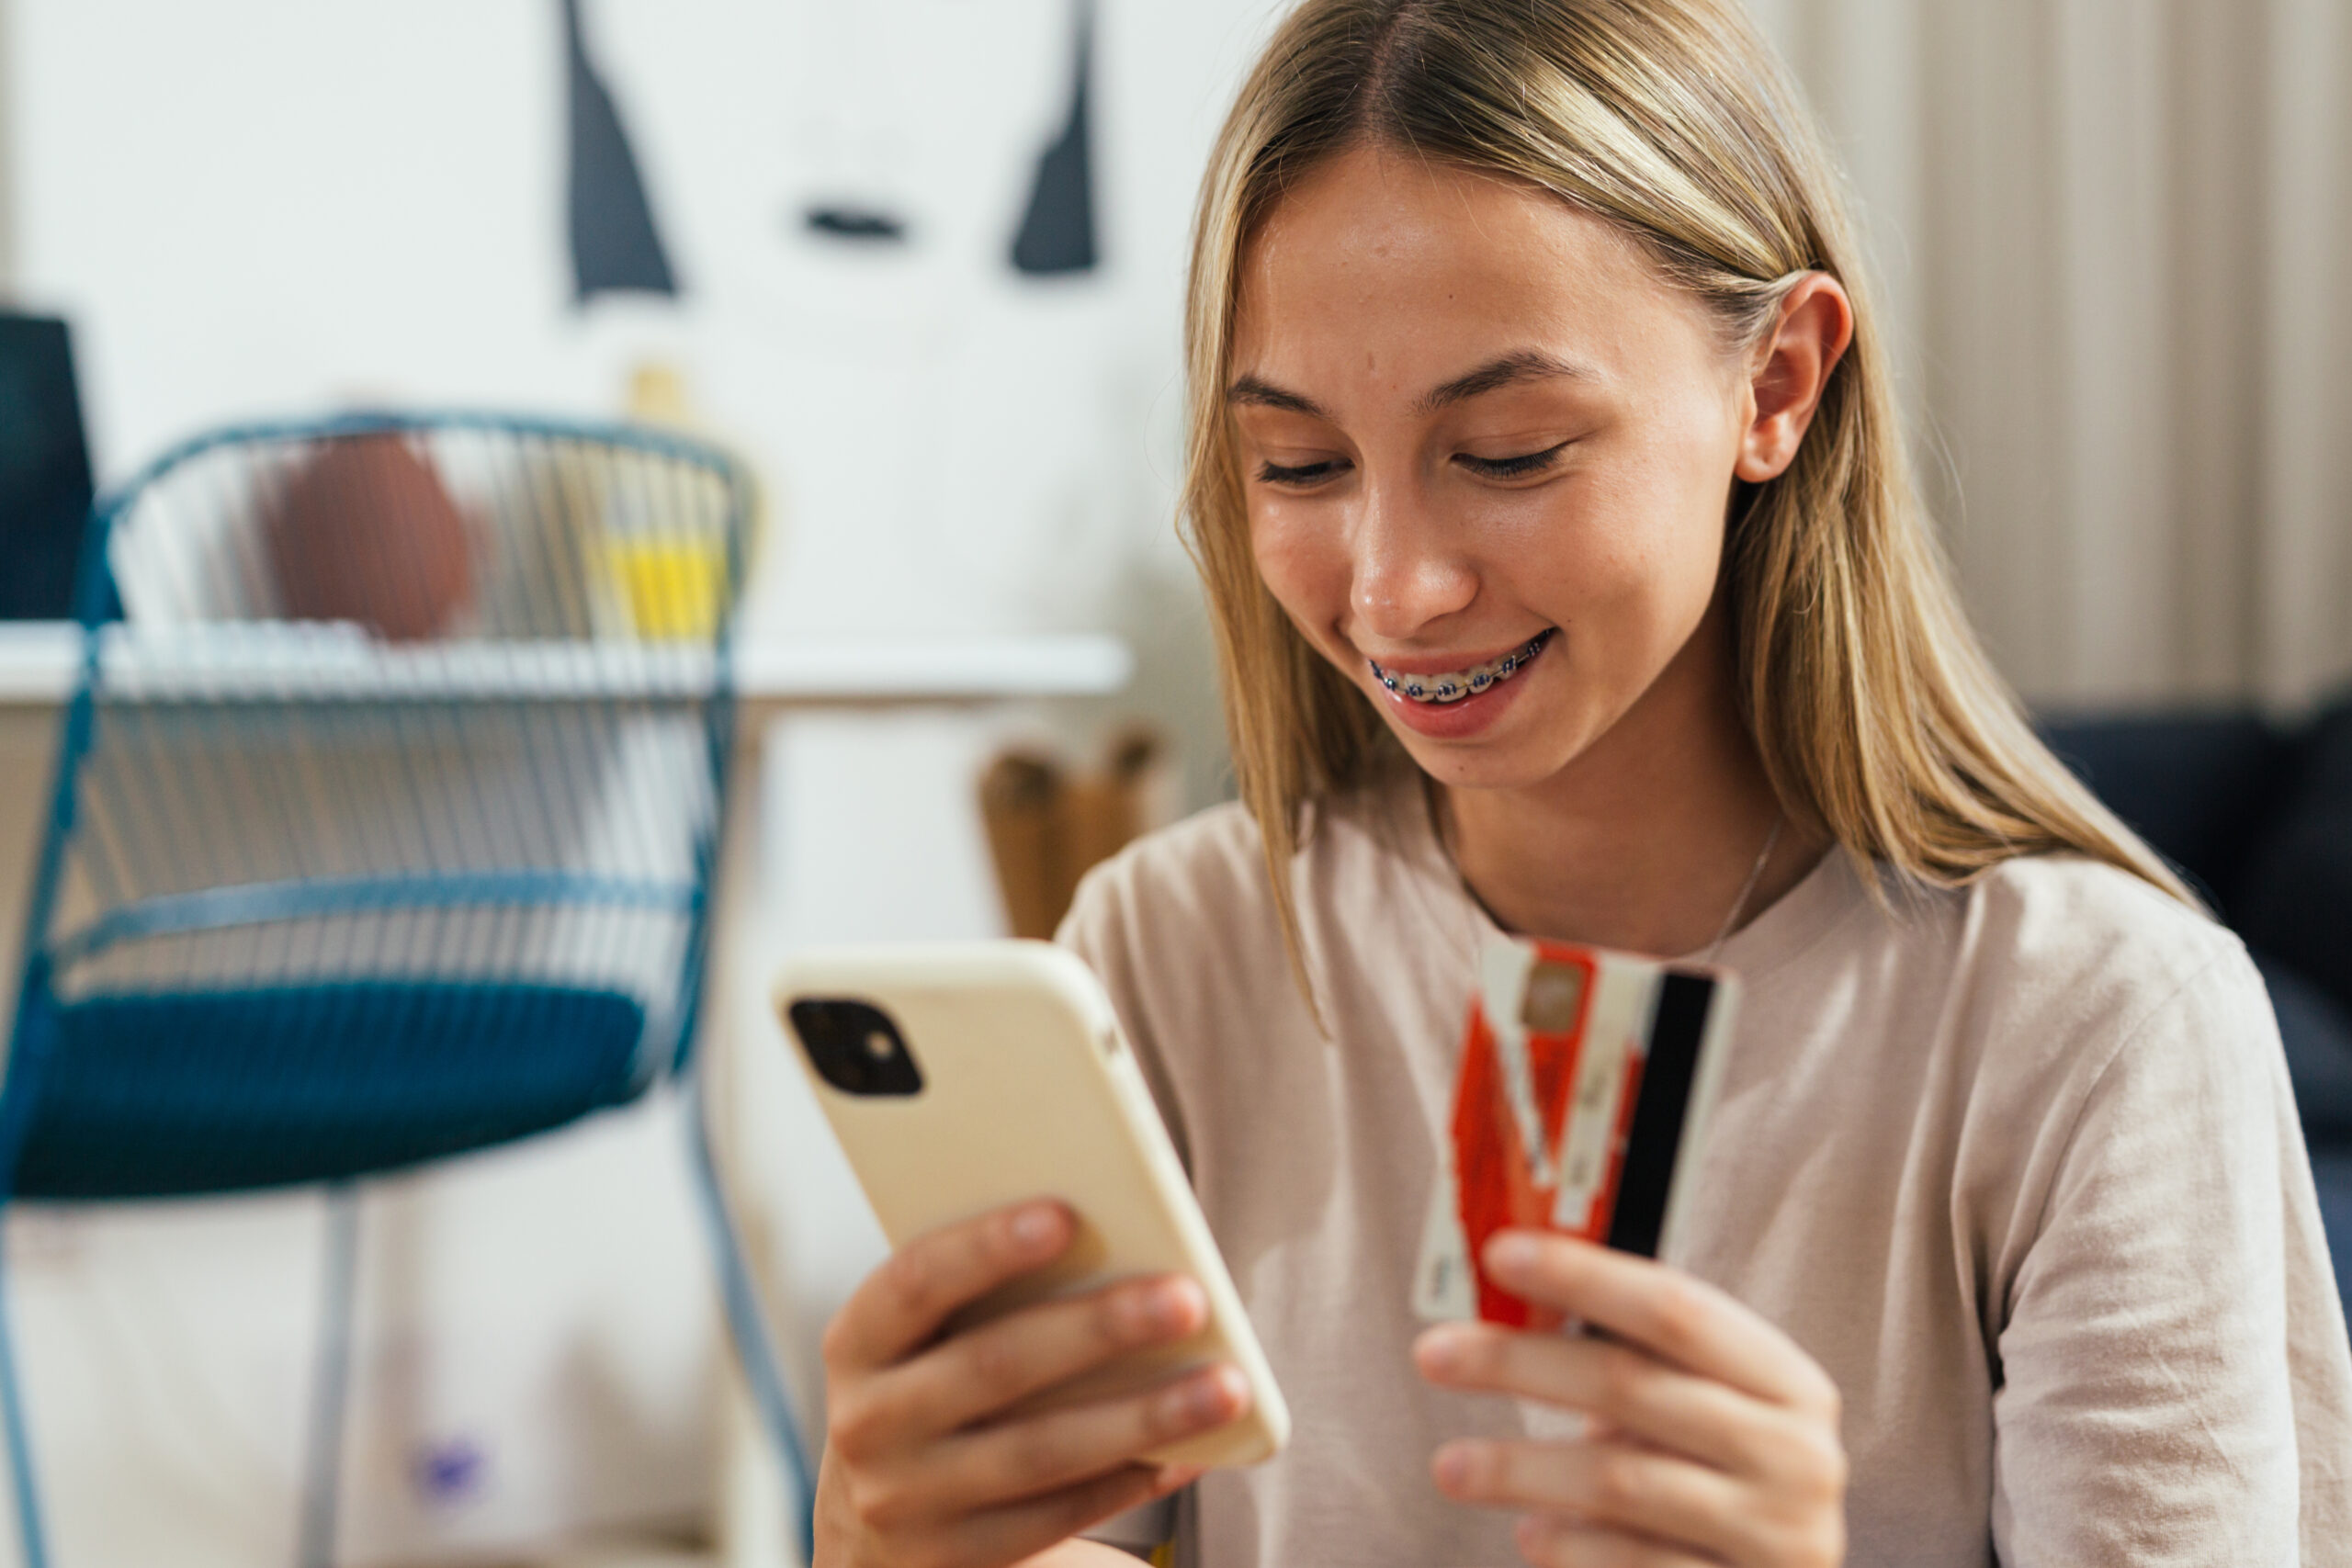 teen girl using a debit card to buy something on her phone.